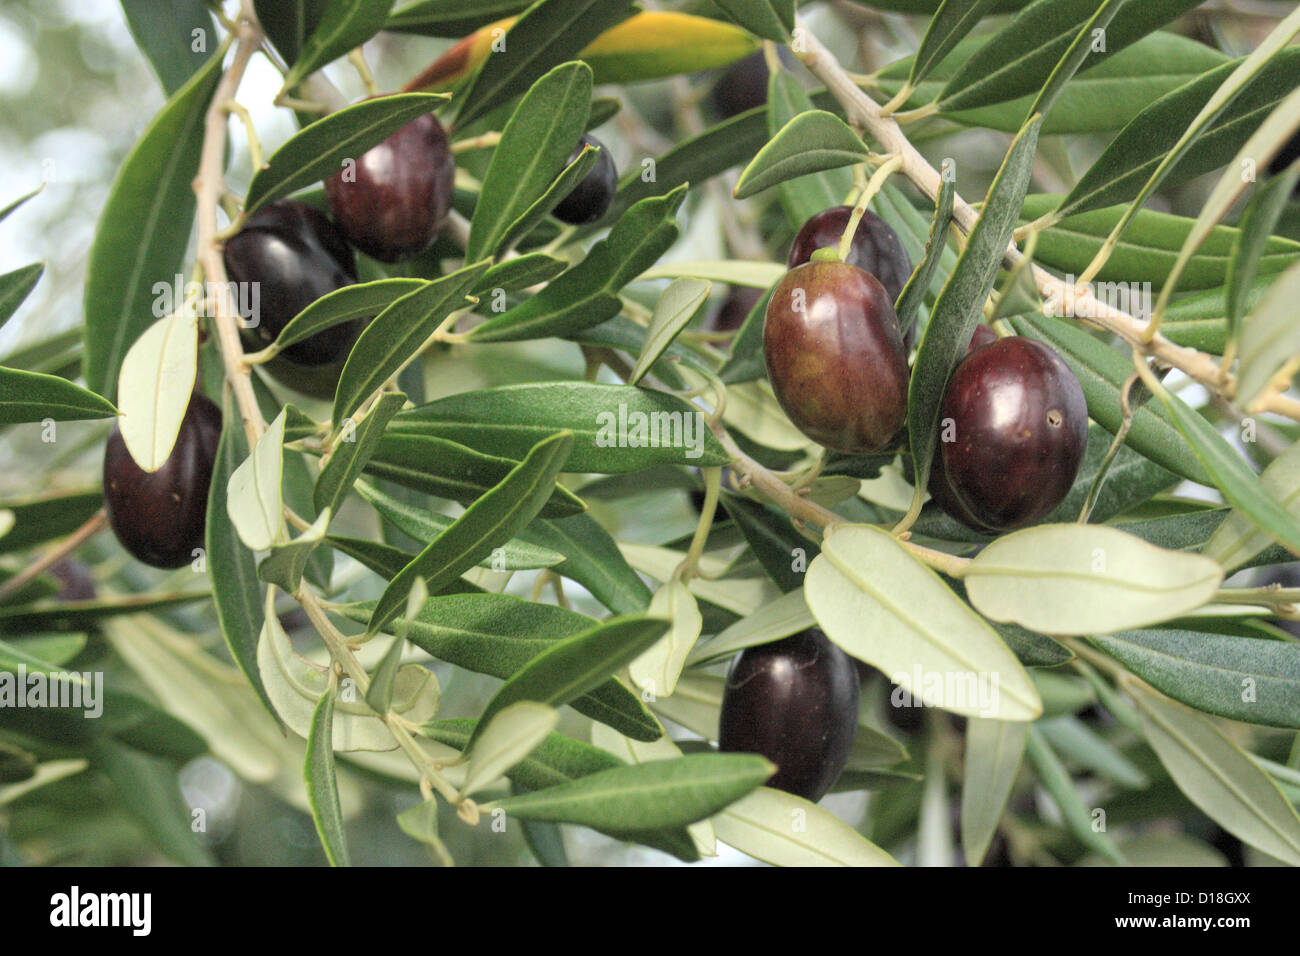 Olives and leafs on a branch Stock Photo